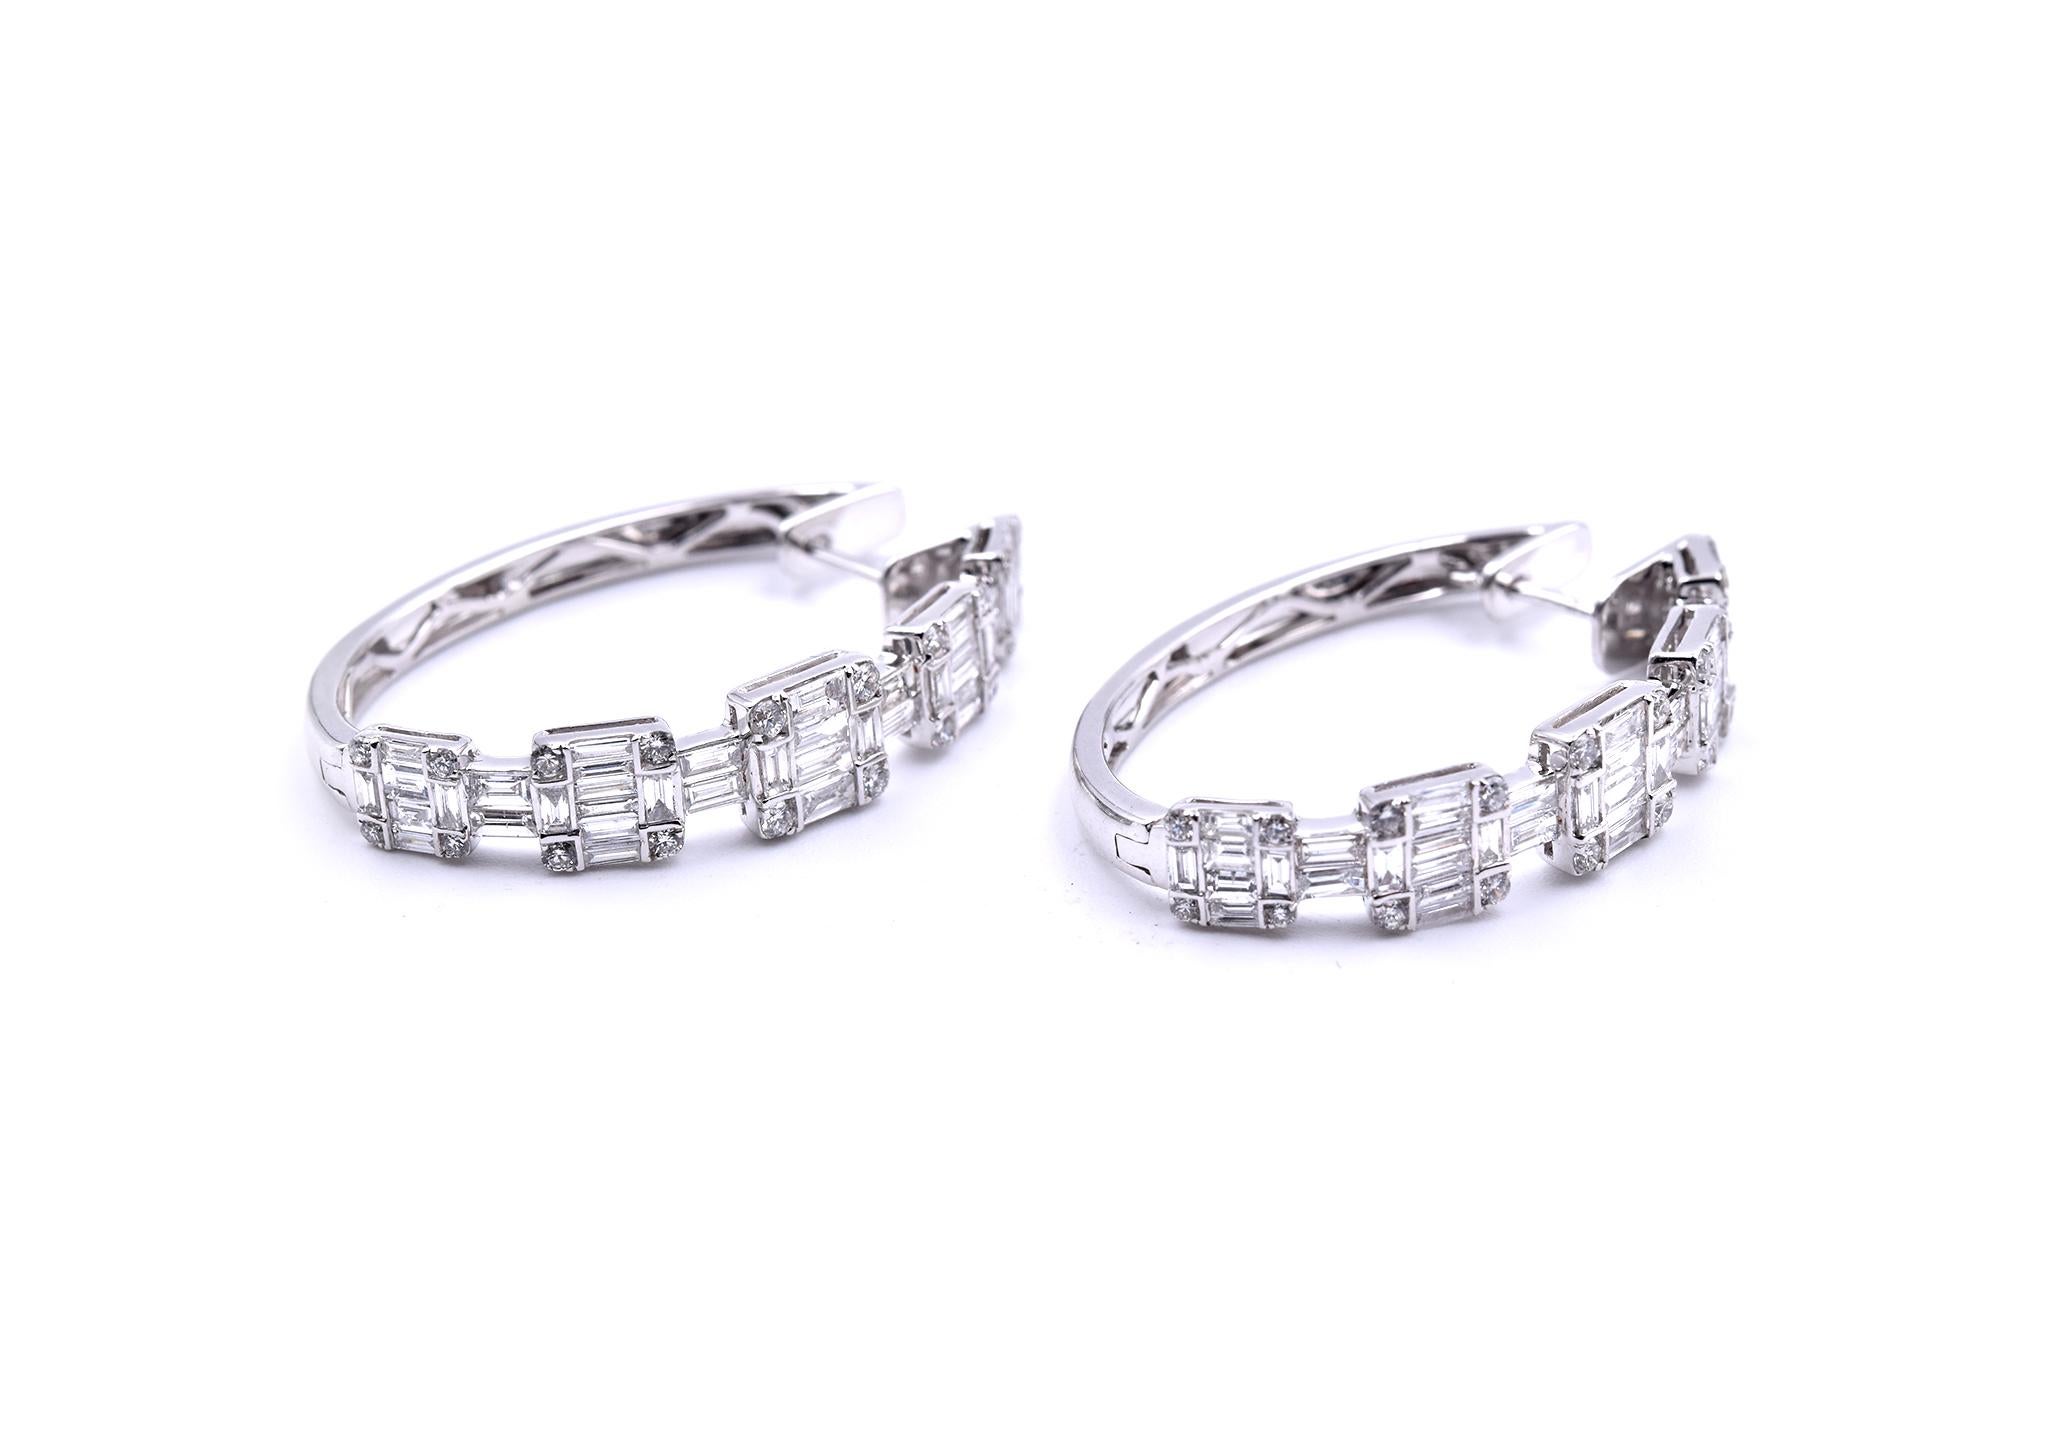 Designer: custom designed
Material: 18k white gold
Diamonds: 40 round brilliant cut= 2.51cttw
Color: G
Clarity: VS
Dimensions: earrings are approximately 35mm by 6.76mm
Fastenings: huggie style
Weight: 10.60 grams
